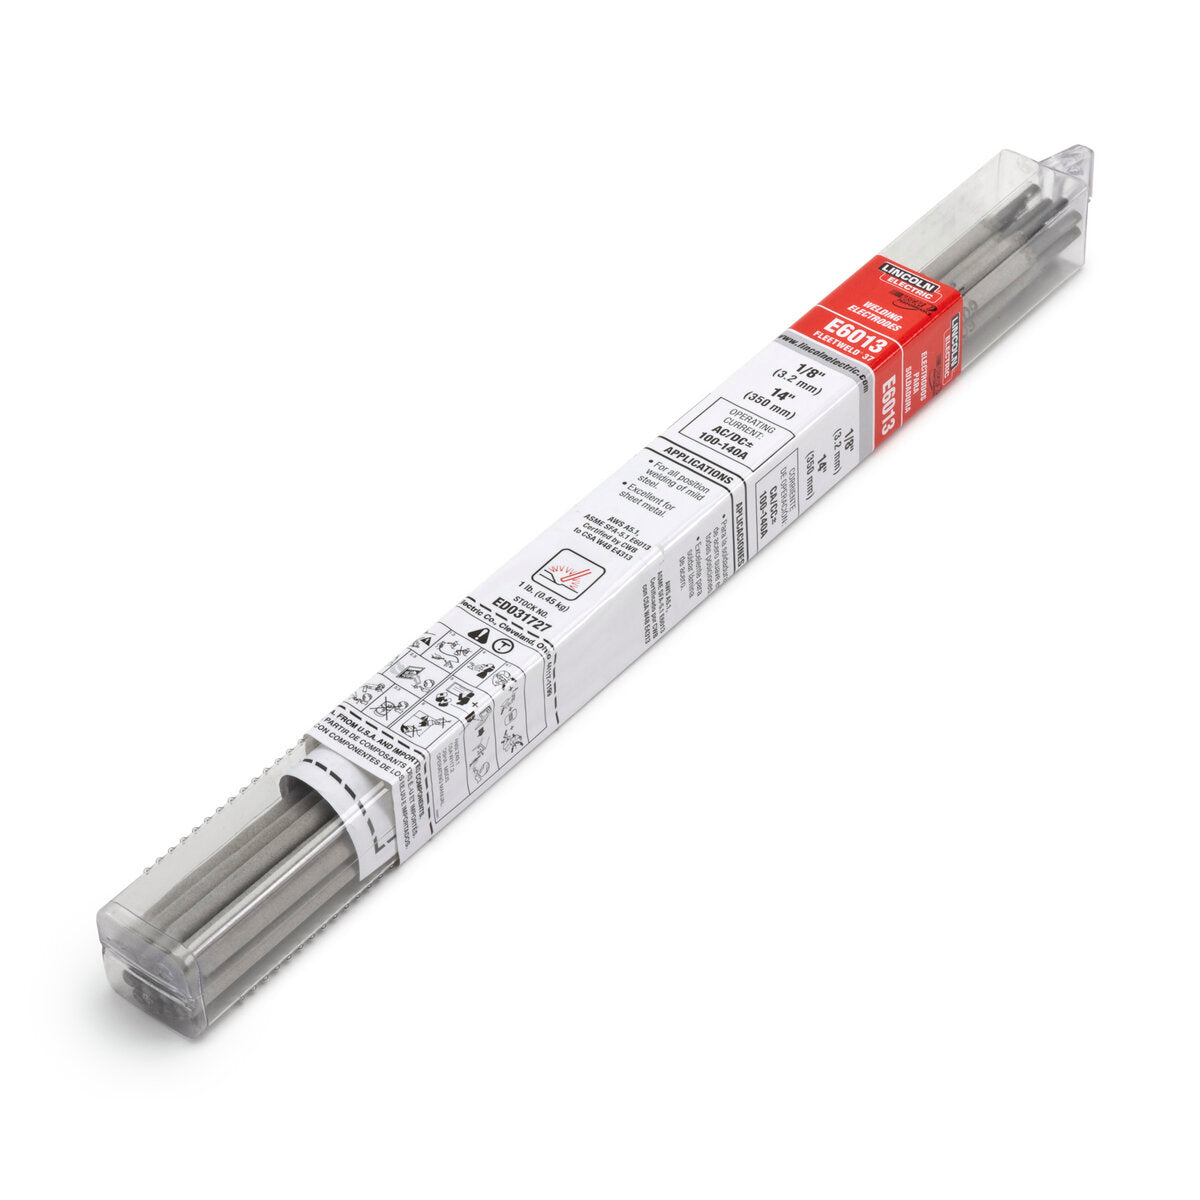 Lincoln Electric - Fleetweld® 37-RSP Stick (SMAW) Electrode, 3/32x12 in, (6) 1 lb Tube - ED033499